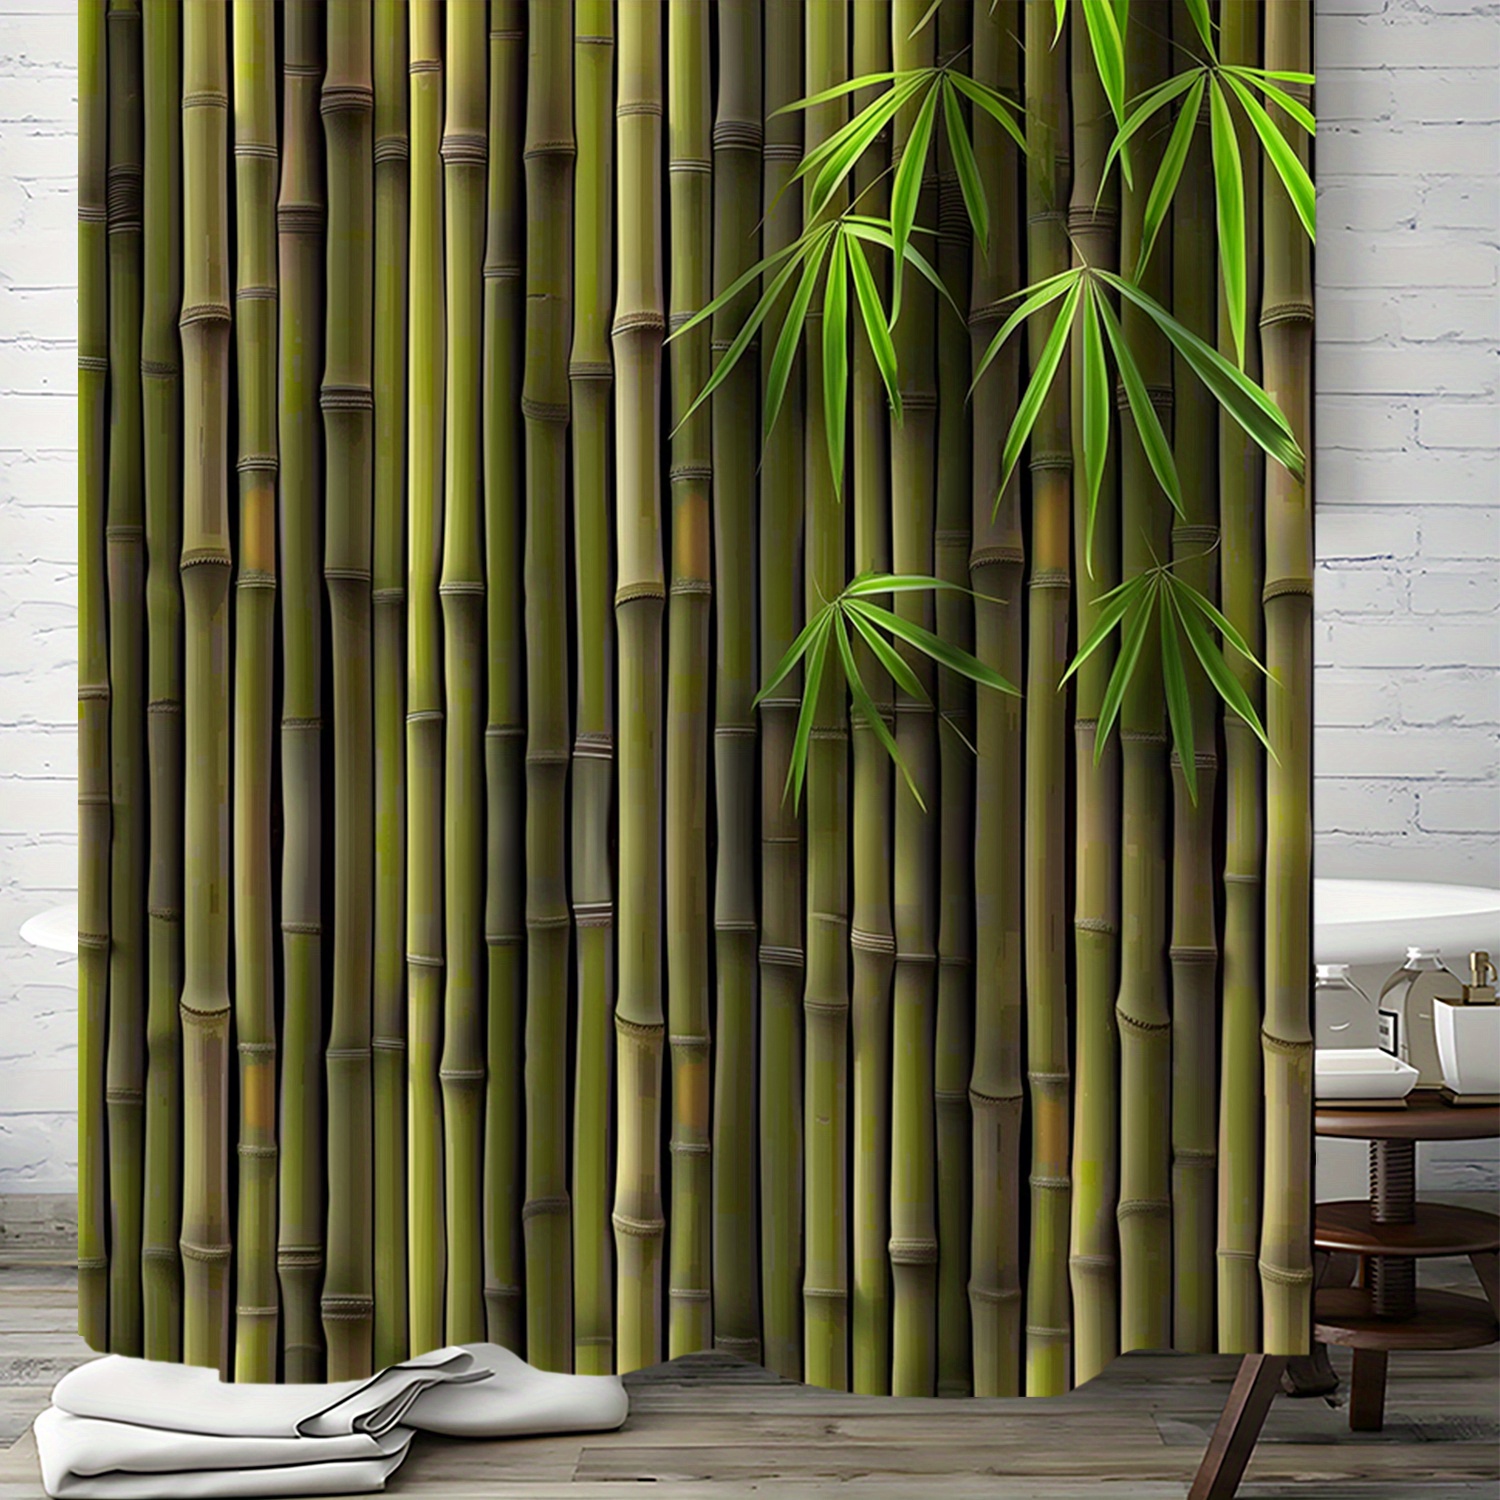 

Bamboo Wall With Green Leaves Shower Curtain - 180cm/71 Inch, Waterproof, Artistic Design, Polyester Material, Includes 12 Hooks, Suitable For Bathroom, Non-chlorine